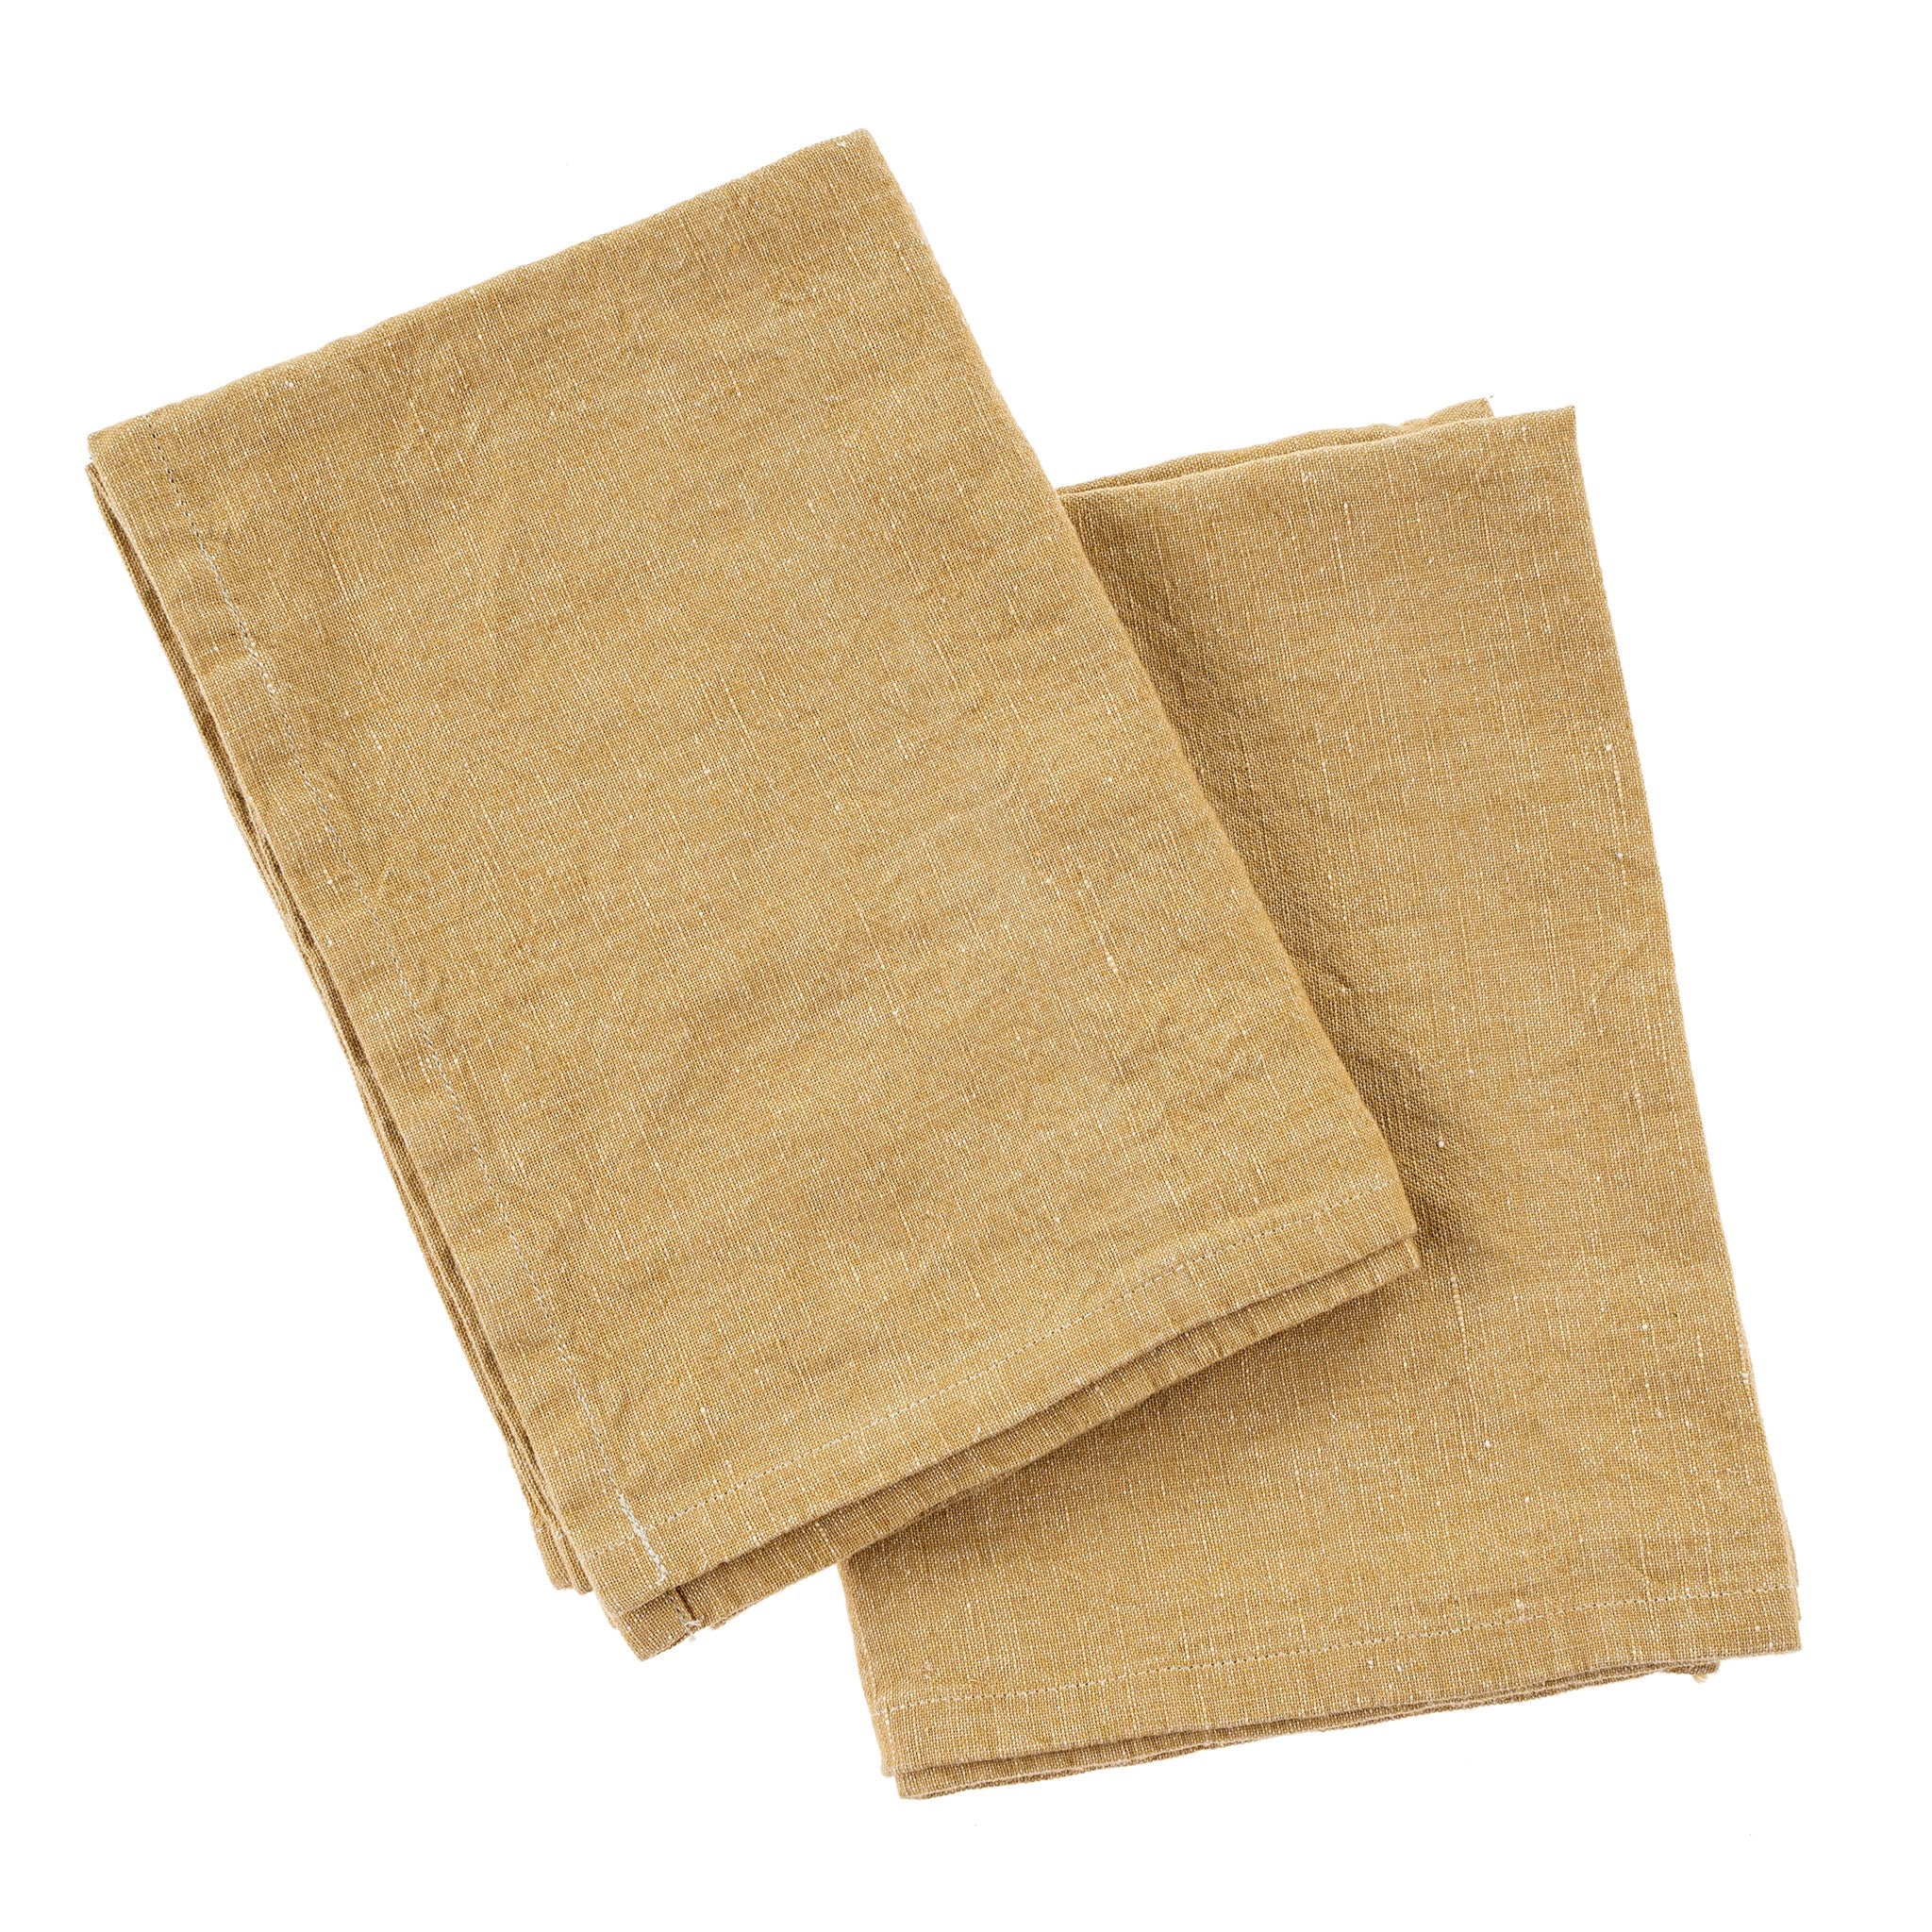 Curry Stonewashed Linen Tea Towels ( Set of 2)